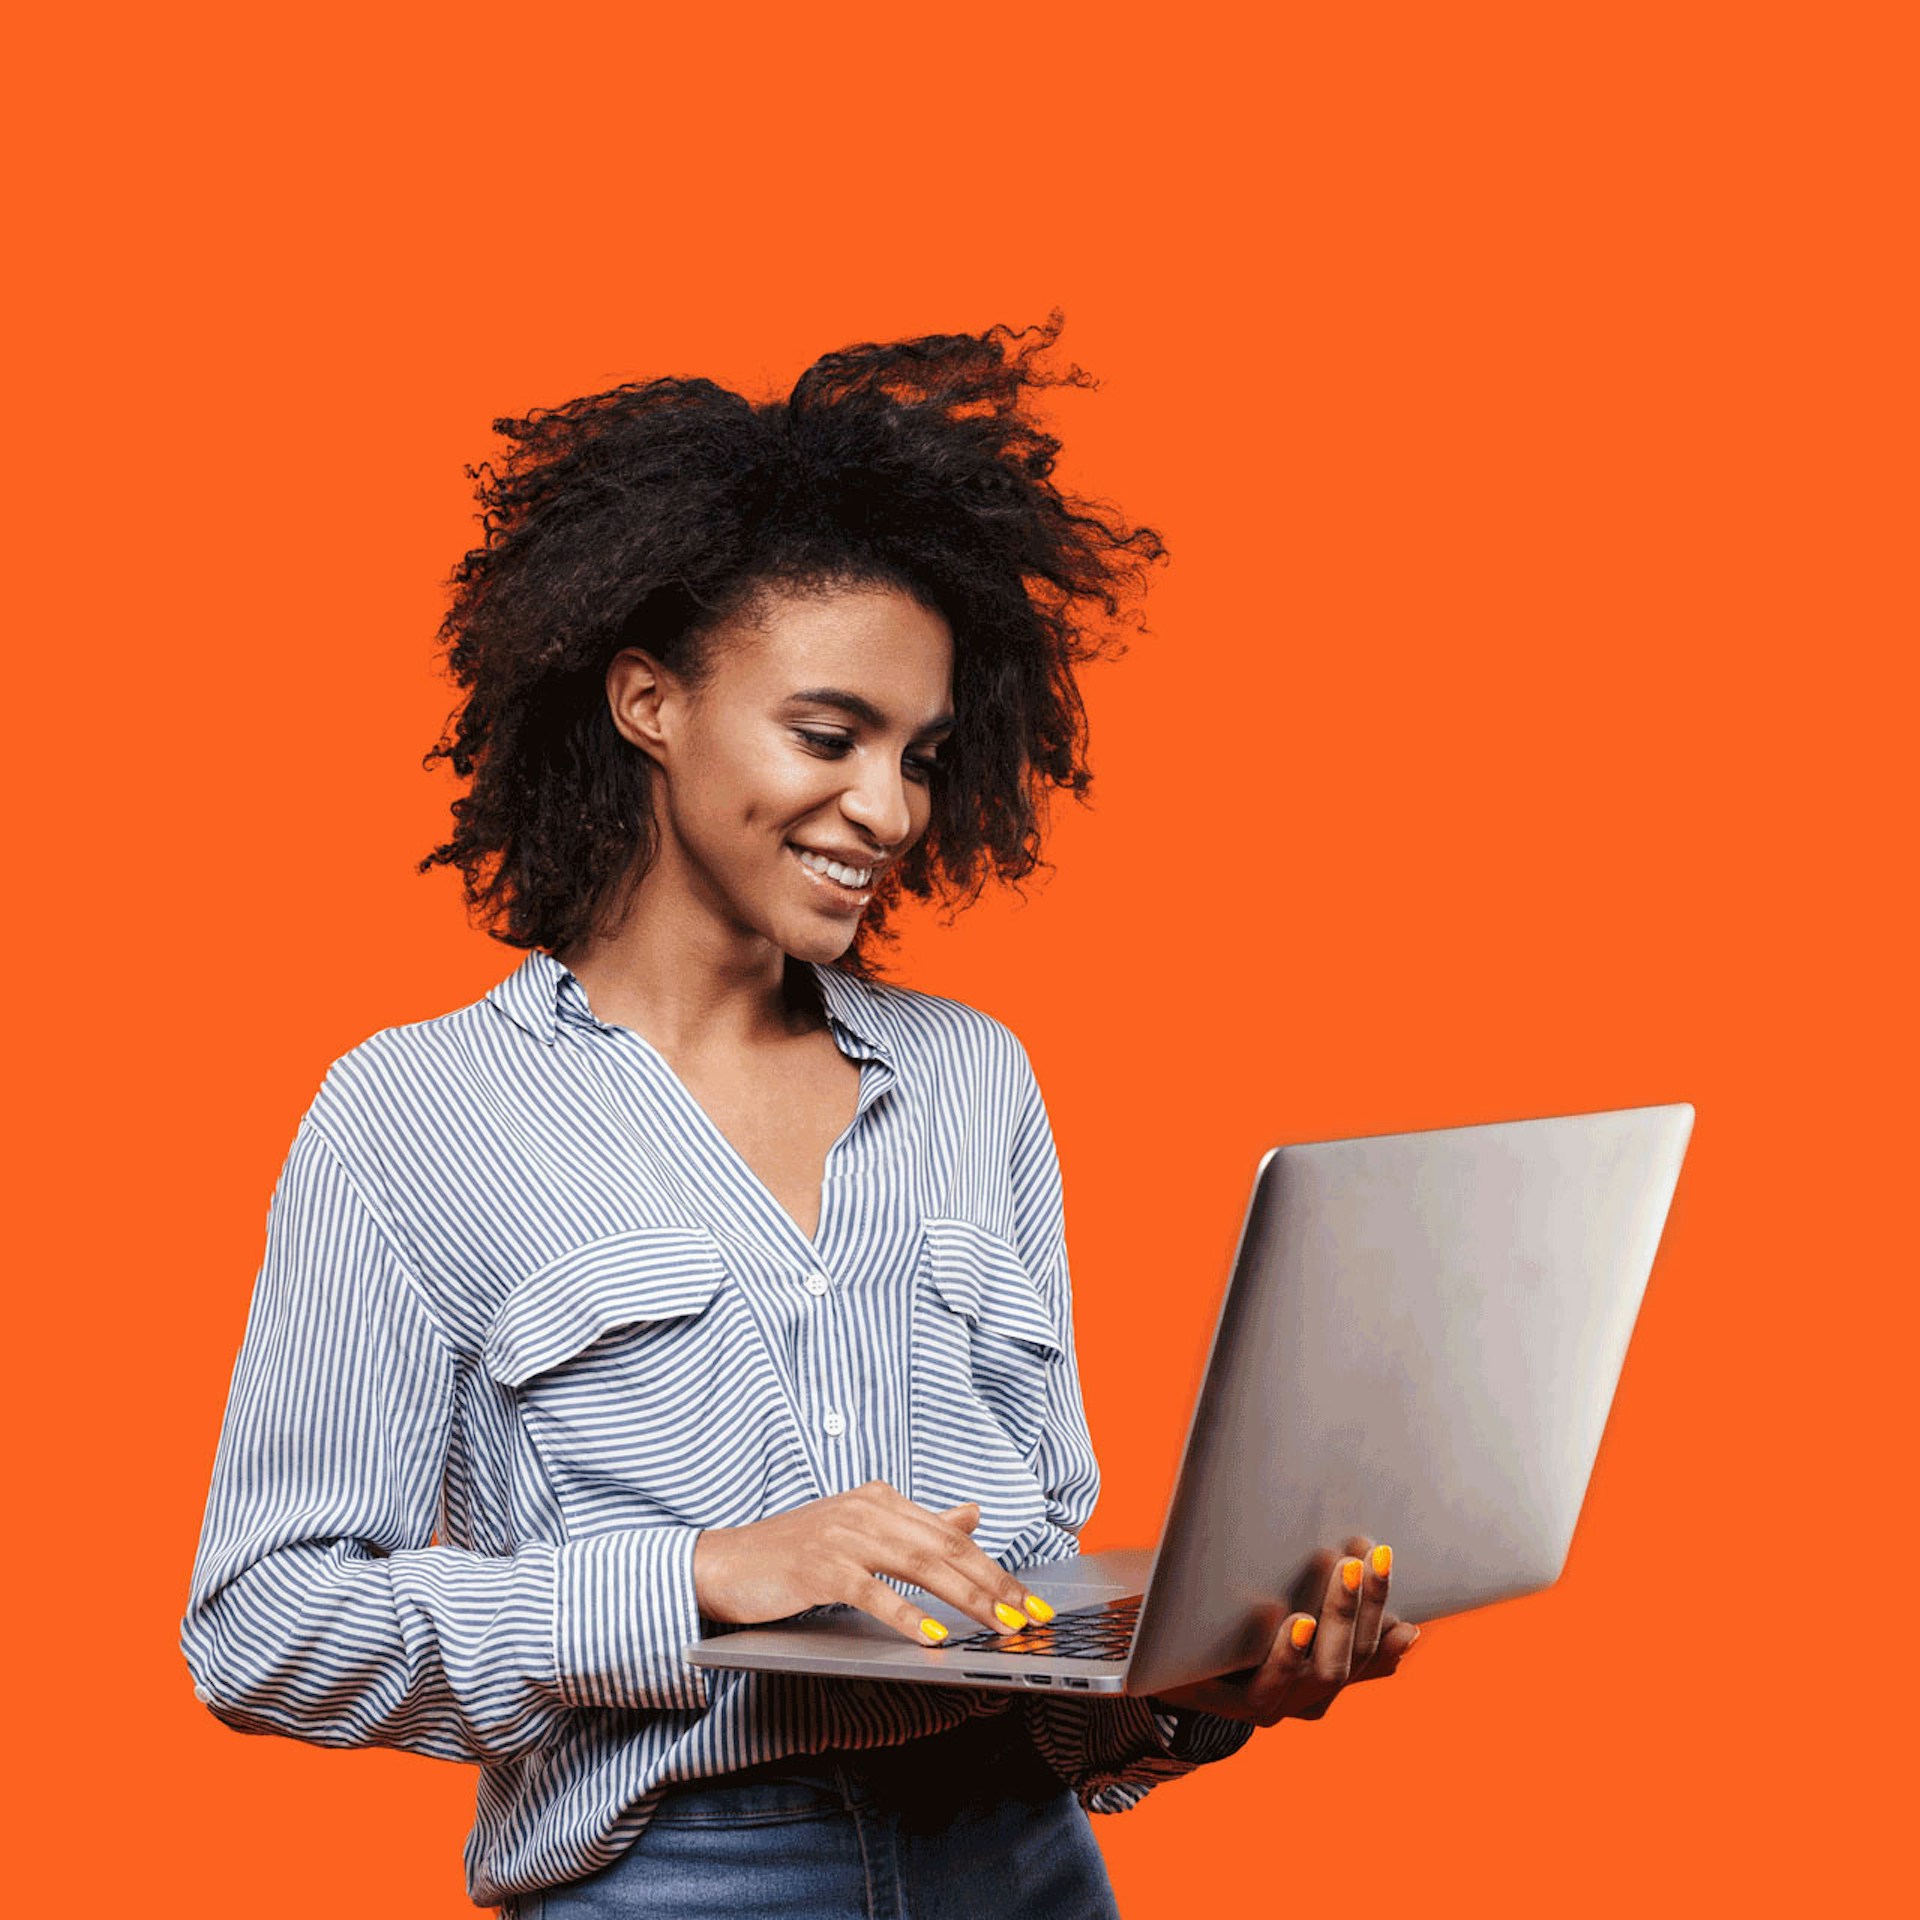 woman with her laptop standing in front of an orange background